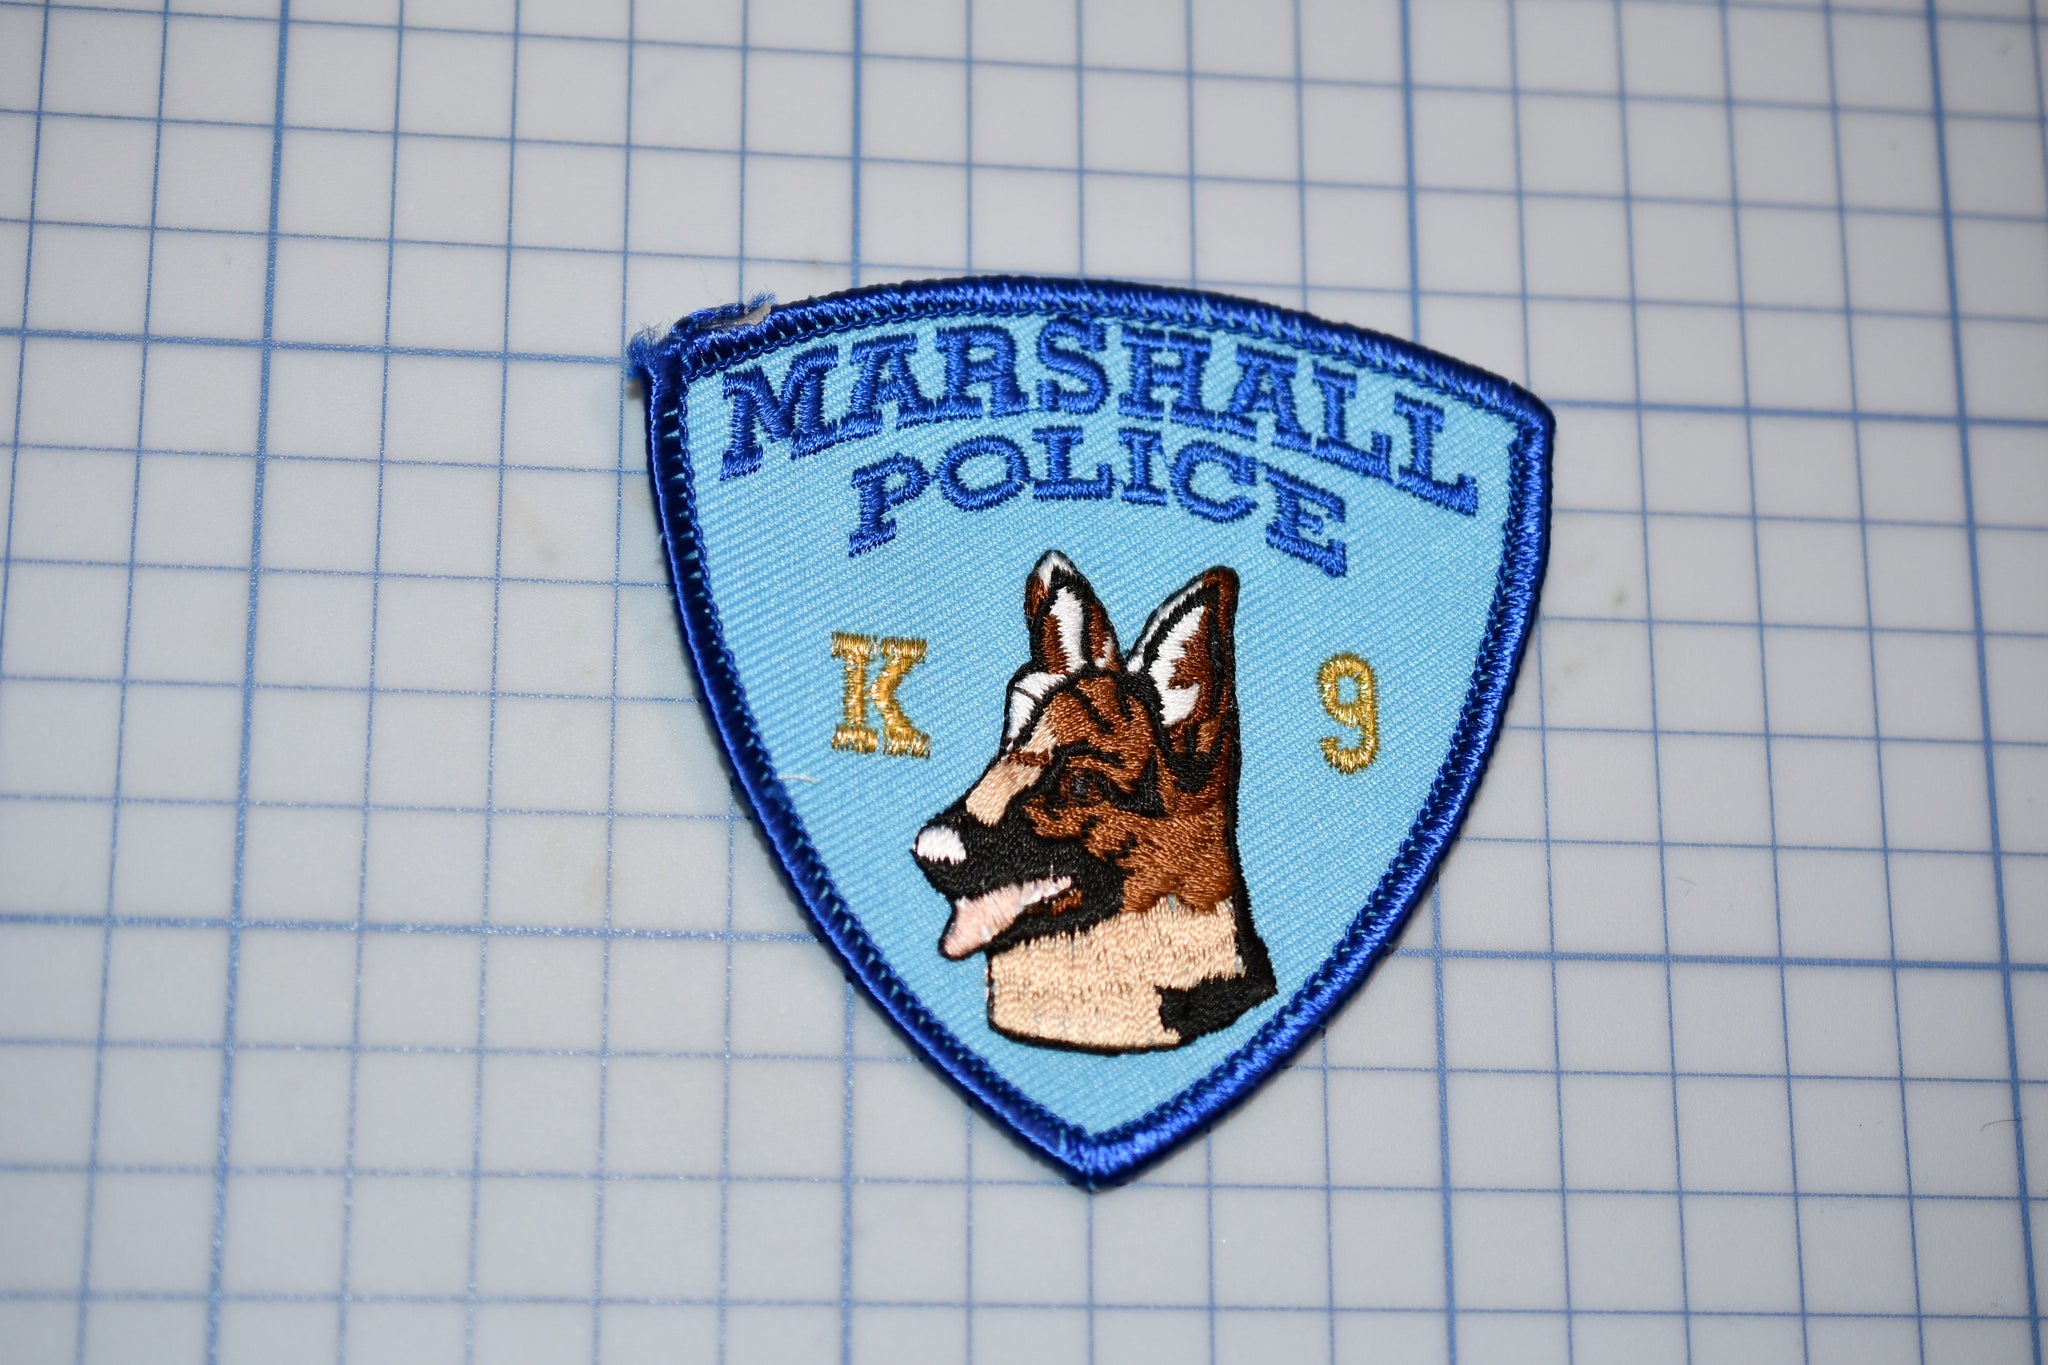 Marshall Police K9 Patch (S5-3)